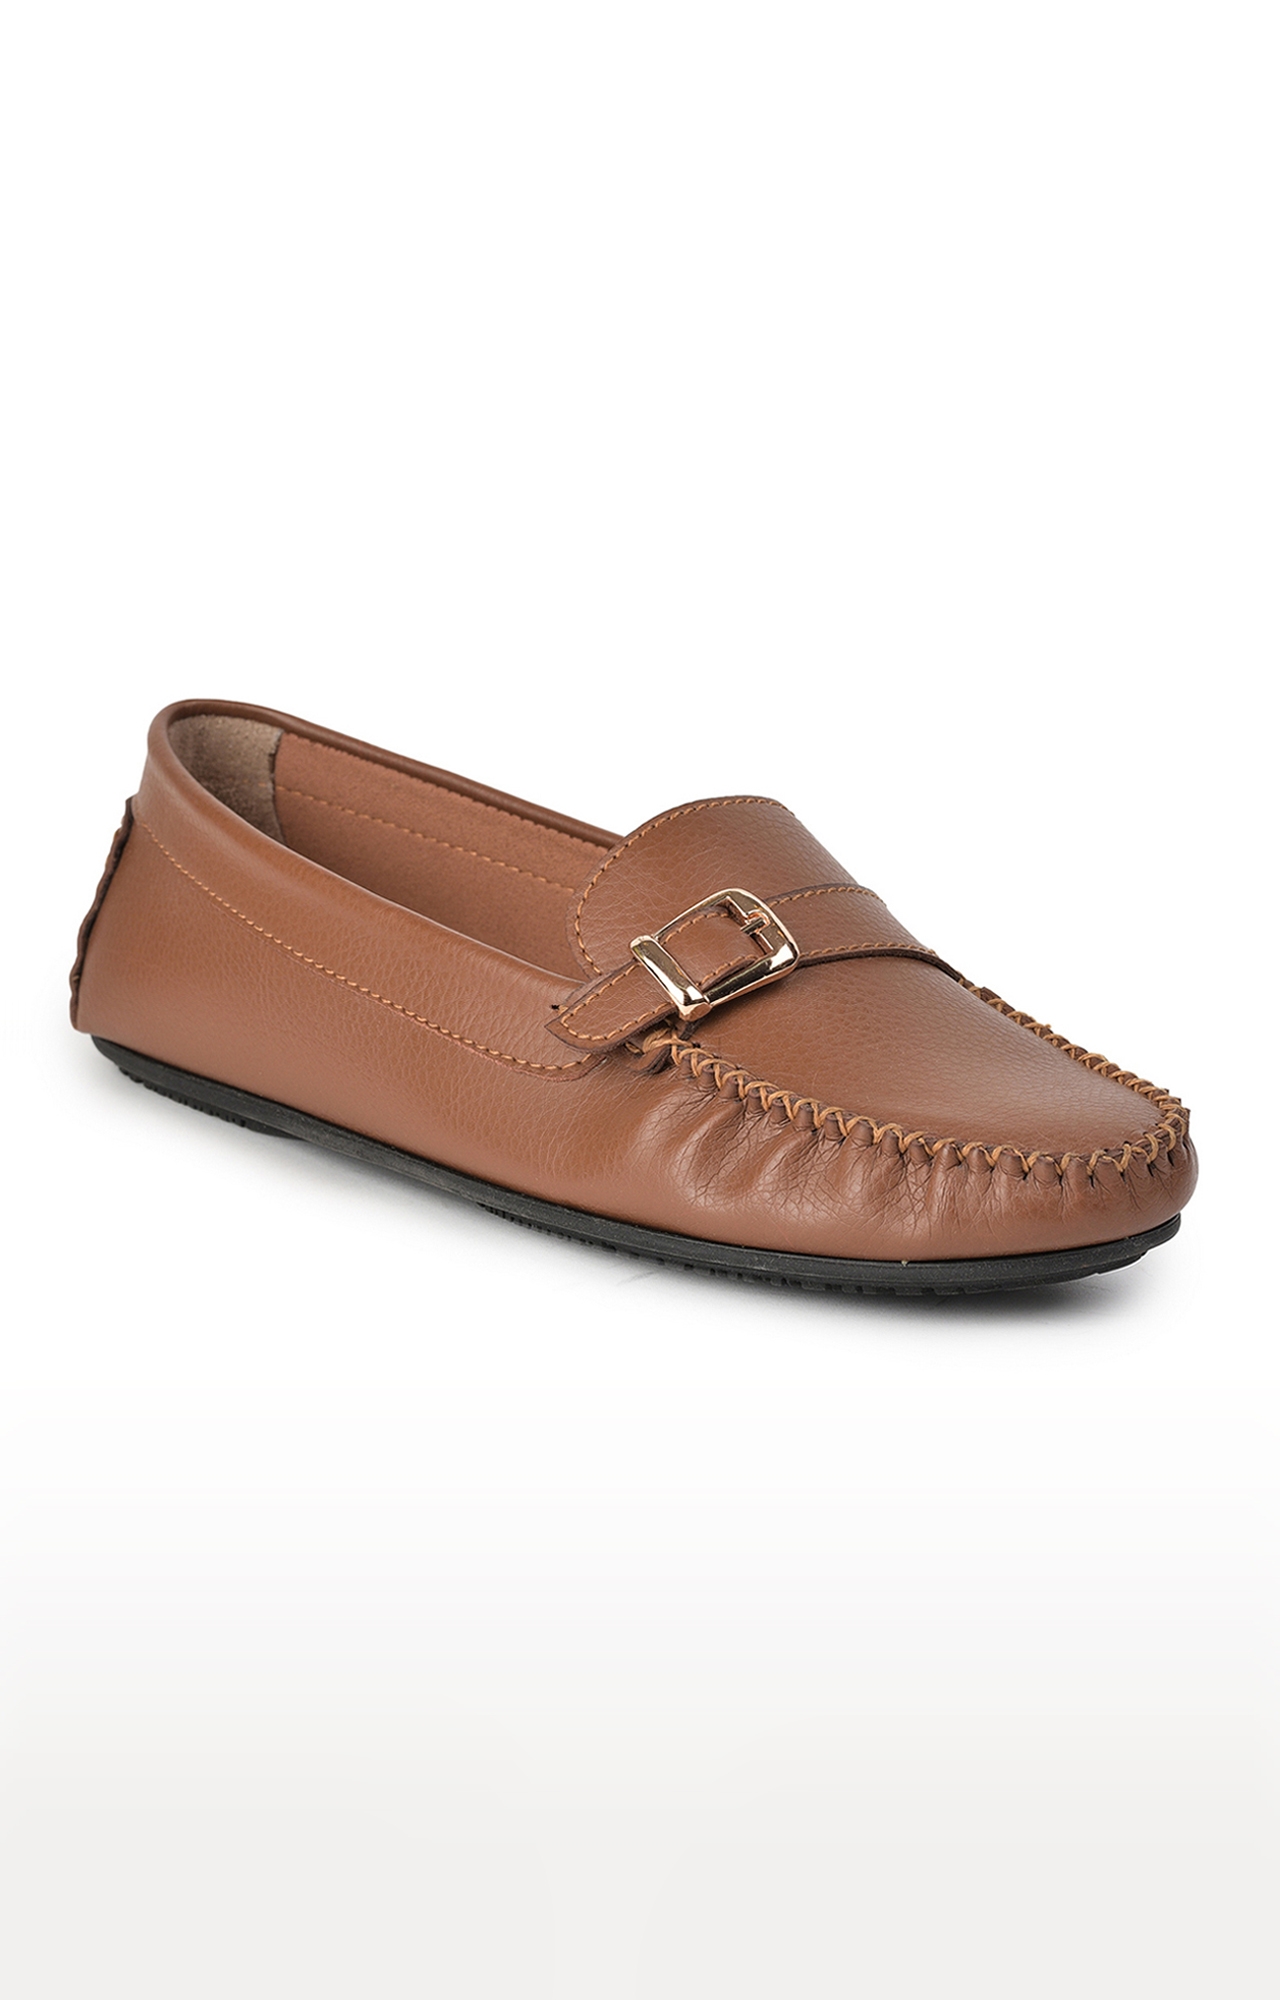 Healers by Liberty Women Tan Loafers